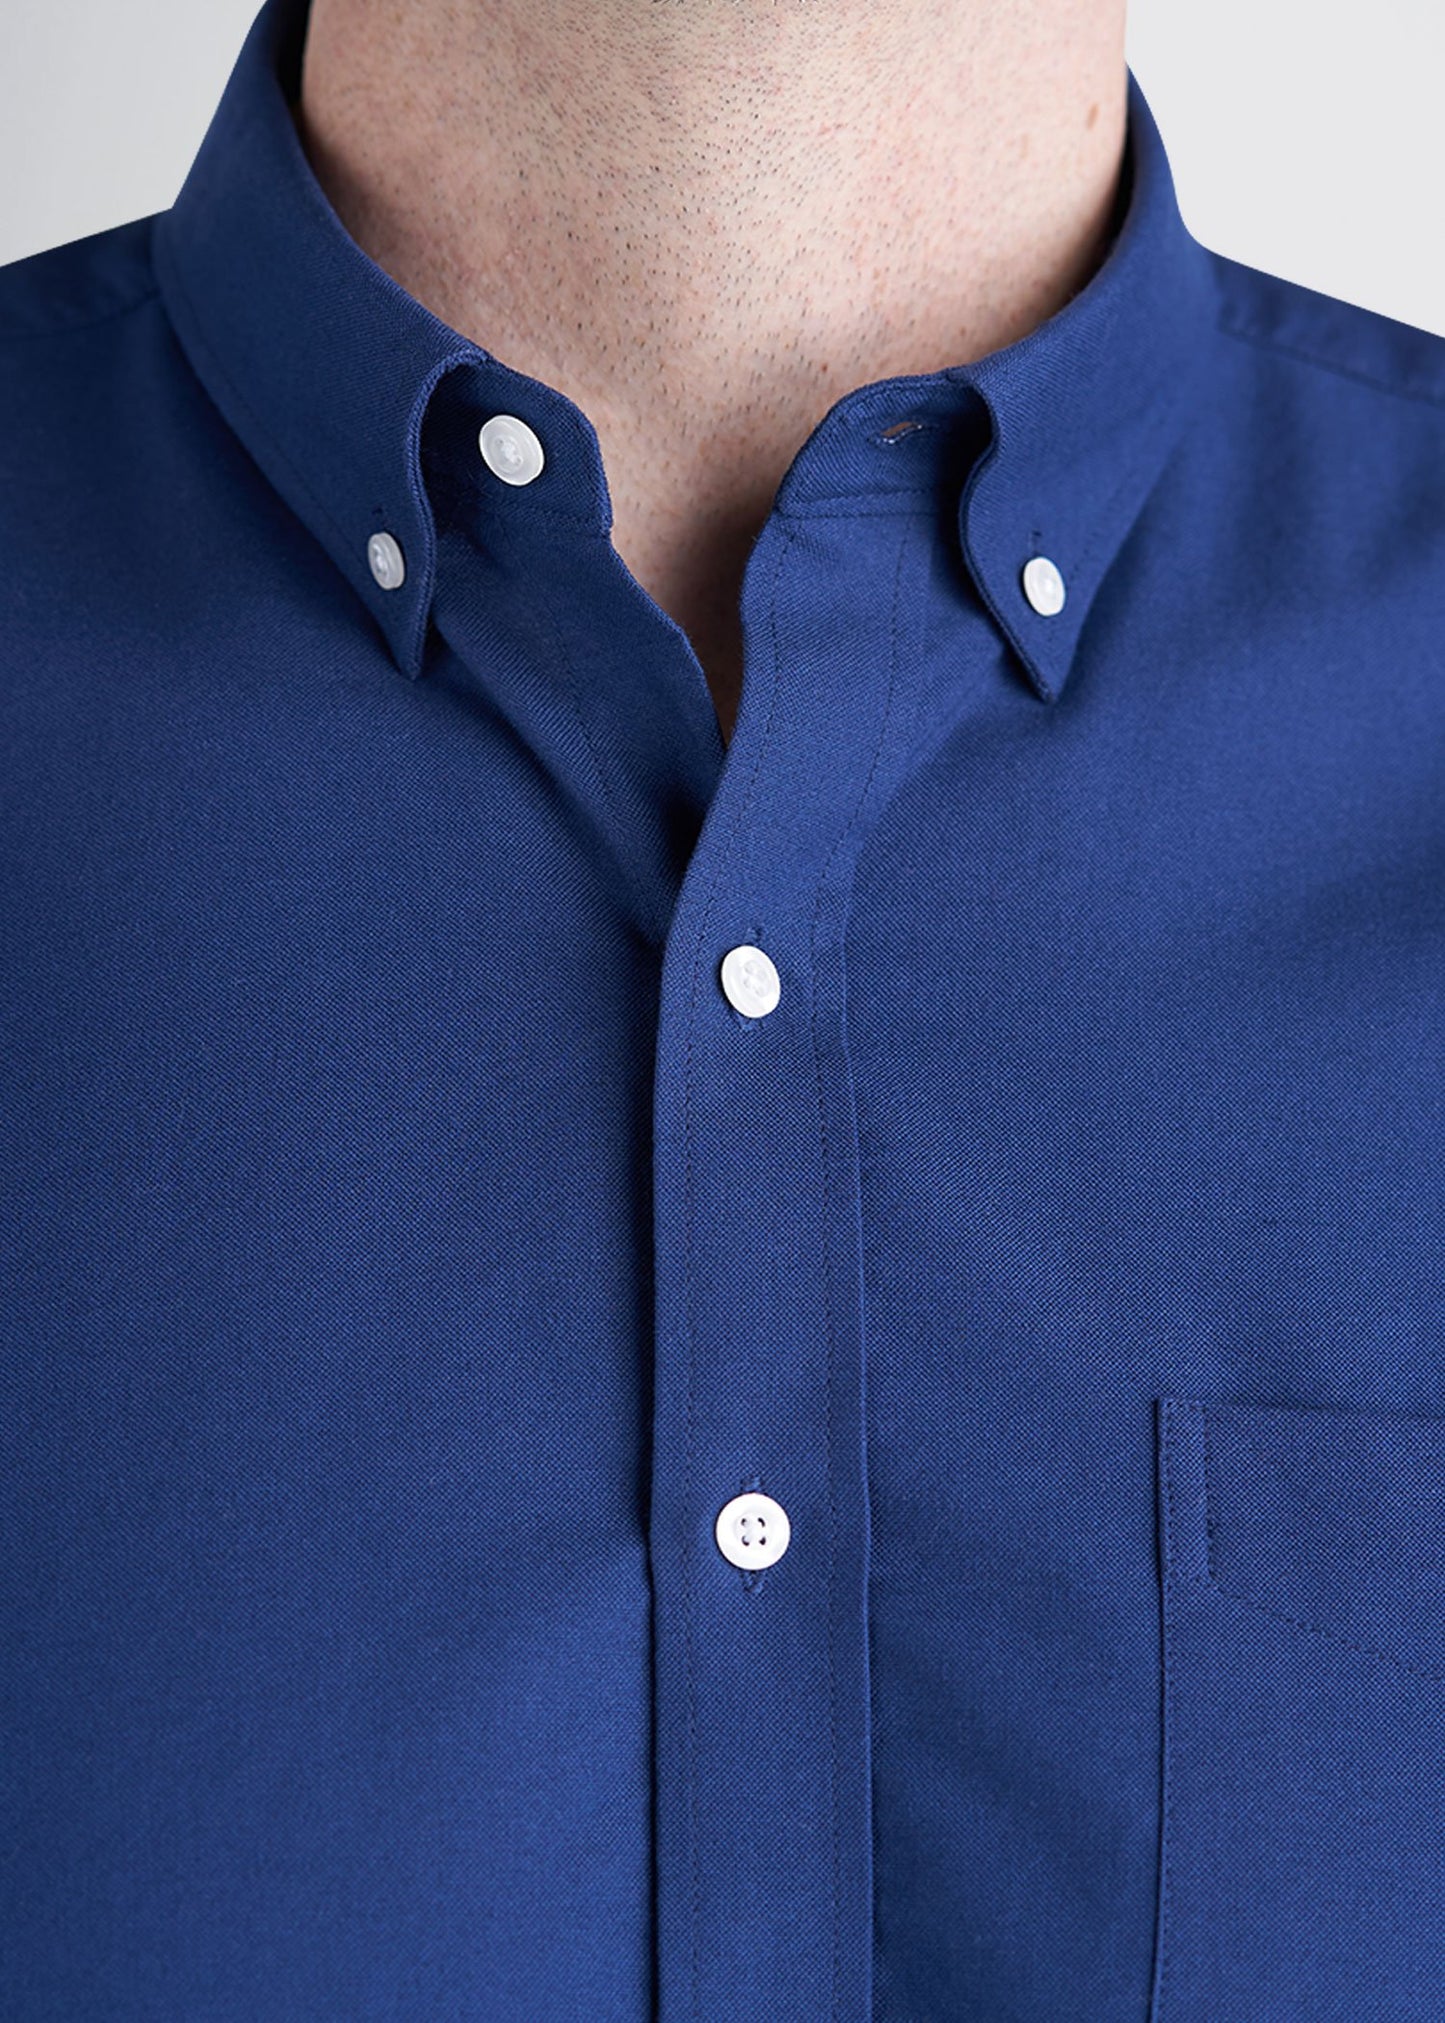 american-tall-mens-oxford-blue-buttons